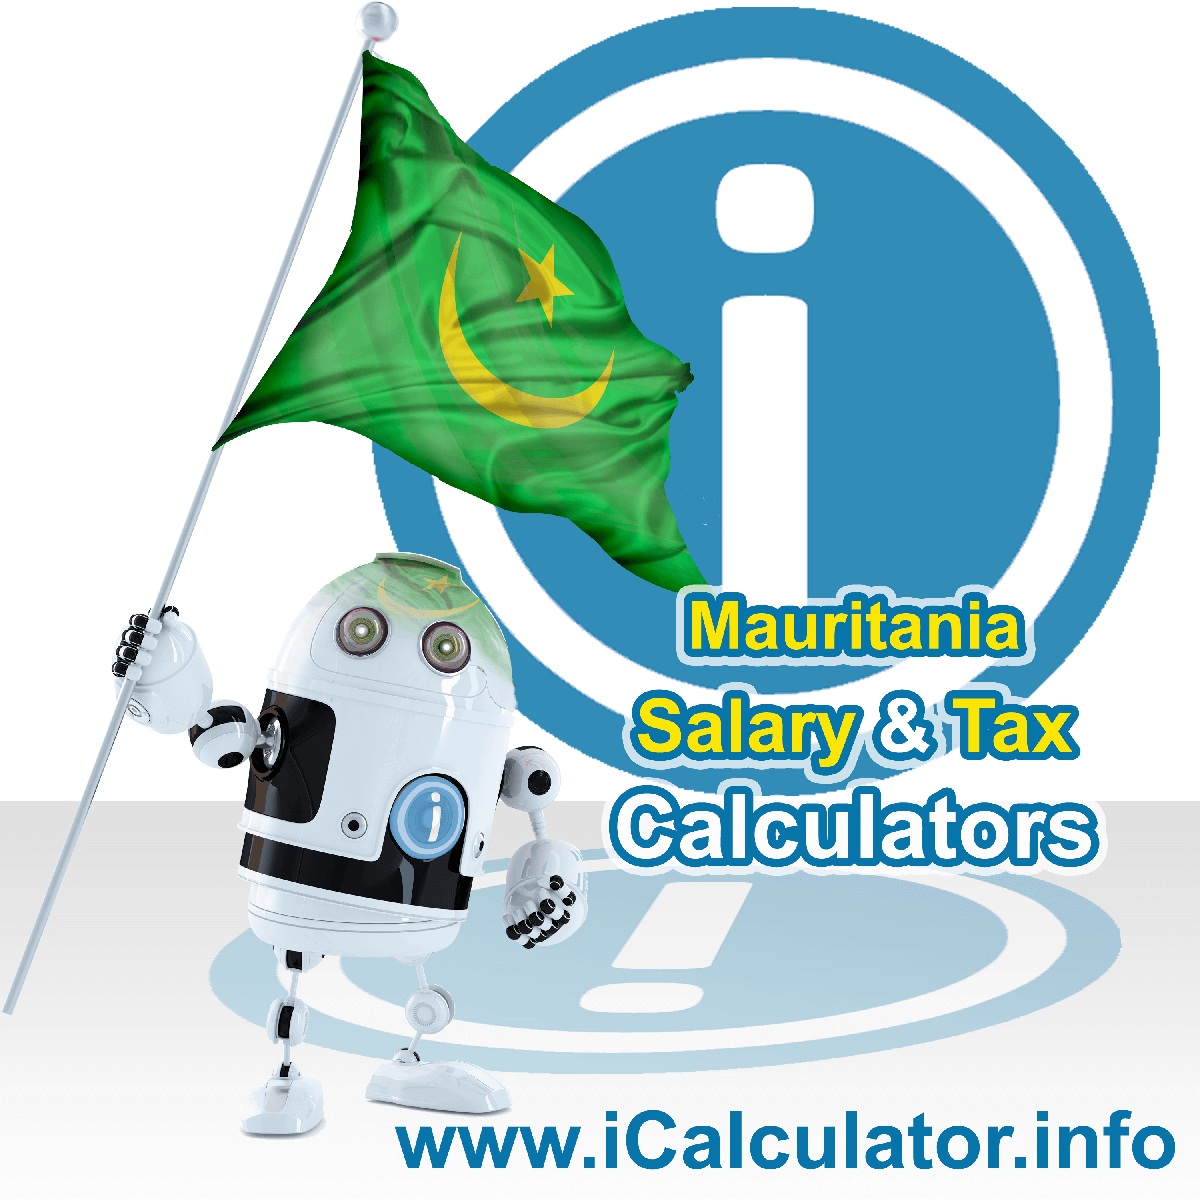 Mauritania Tax Calculator. This image shows the Mauritania flag and information relating to the tax formula for the Mauritania Salary Calculator